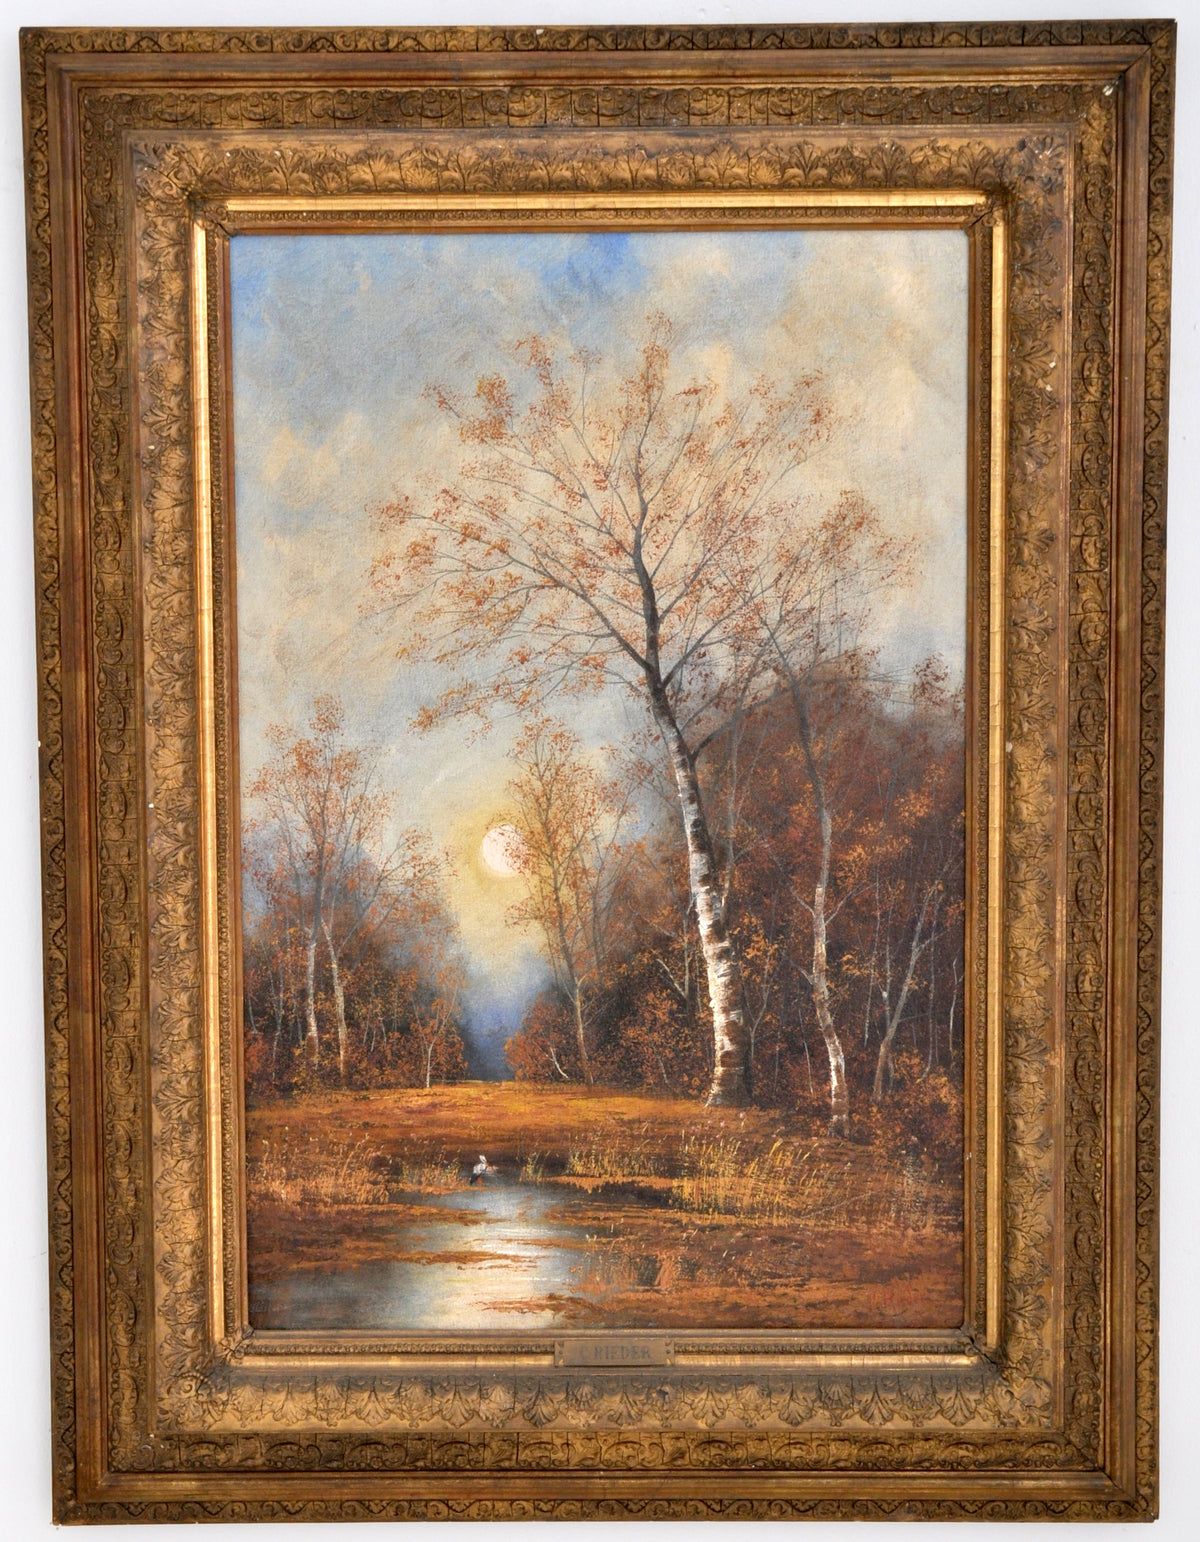 Antique Pair of Vertical Landscapes Oil on Canvas by C. Rieder (1840-1905), Circa 1880